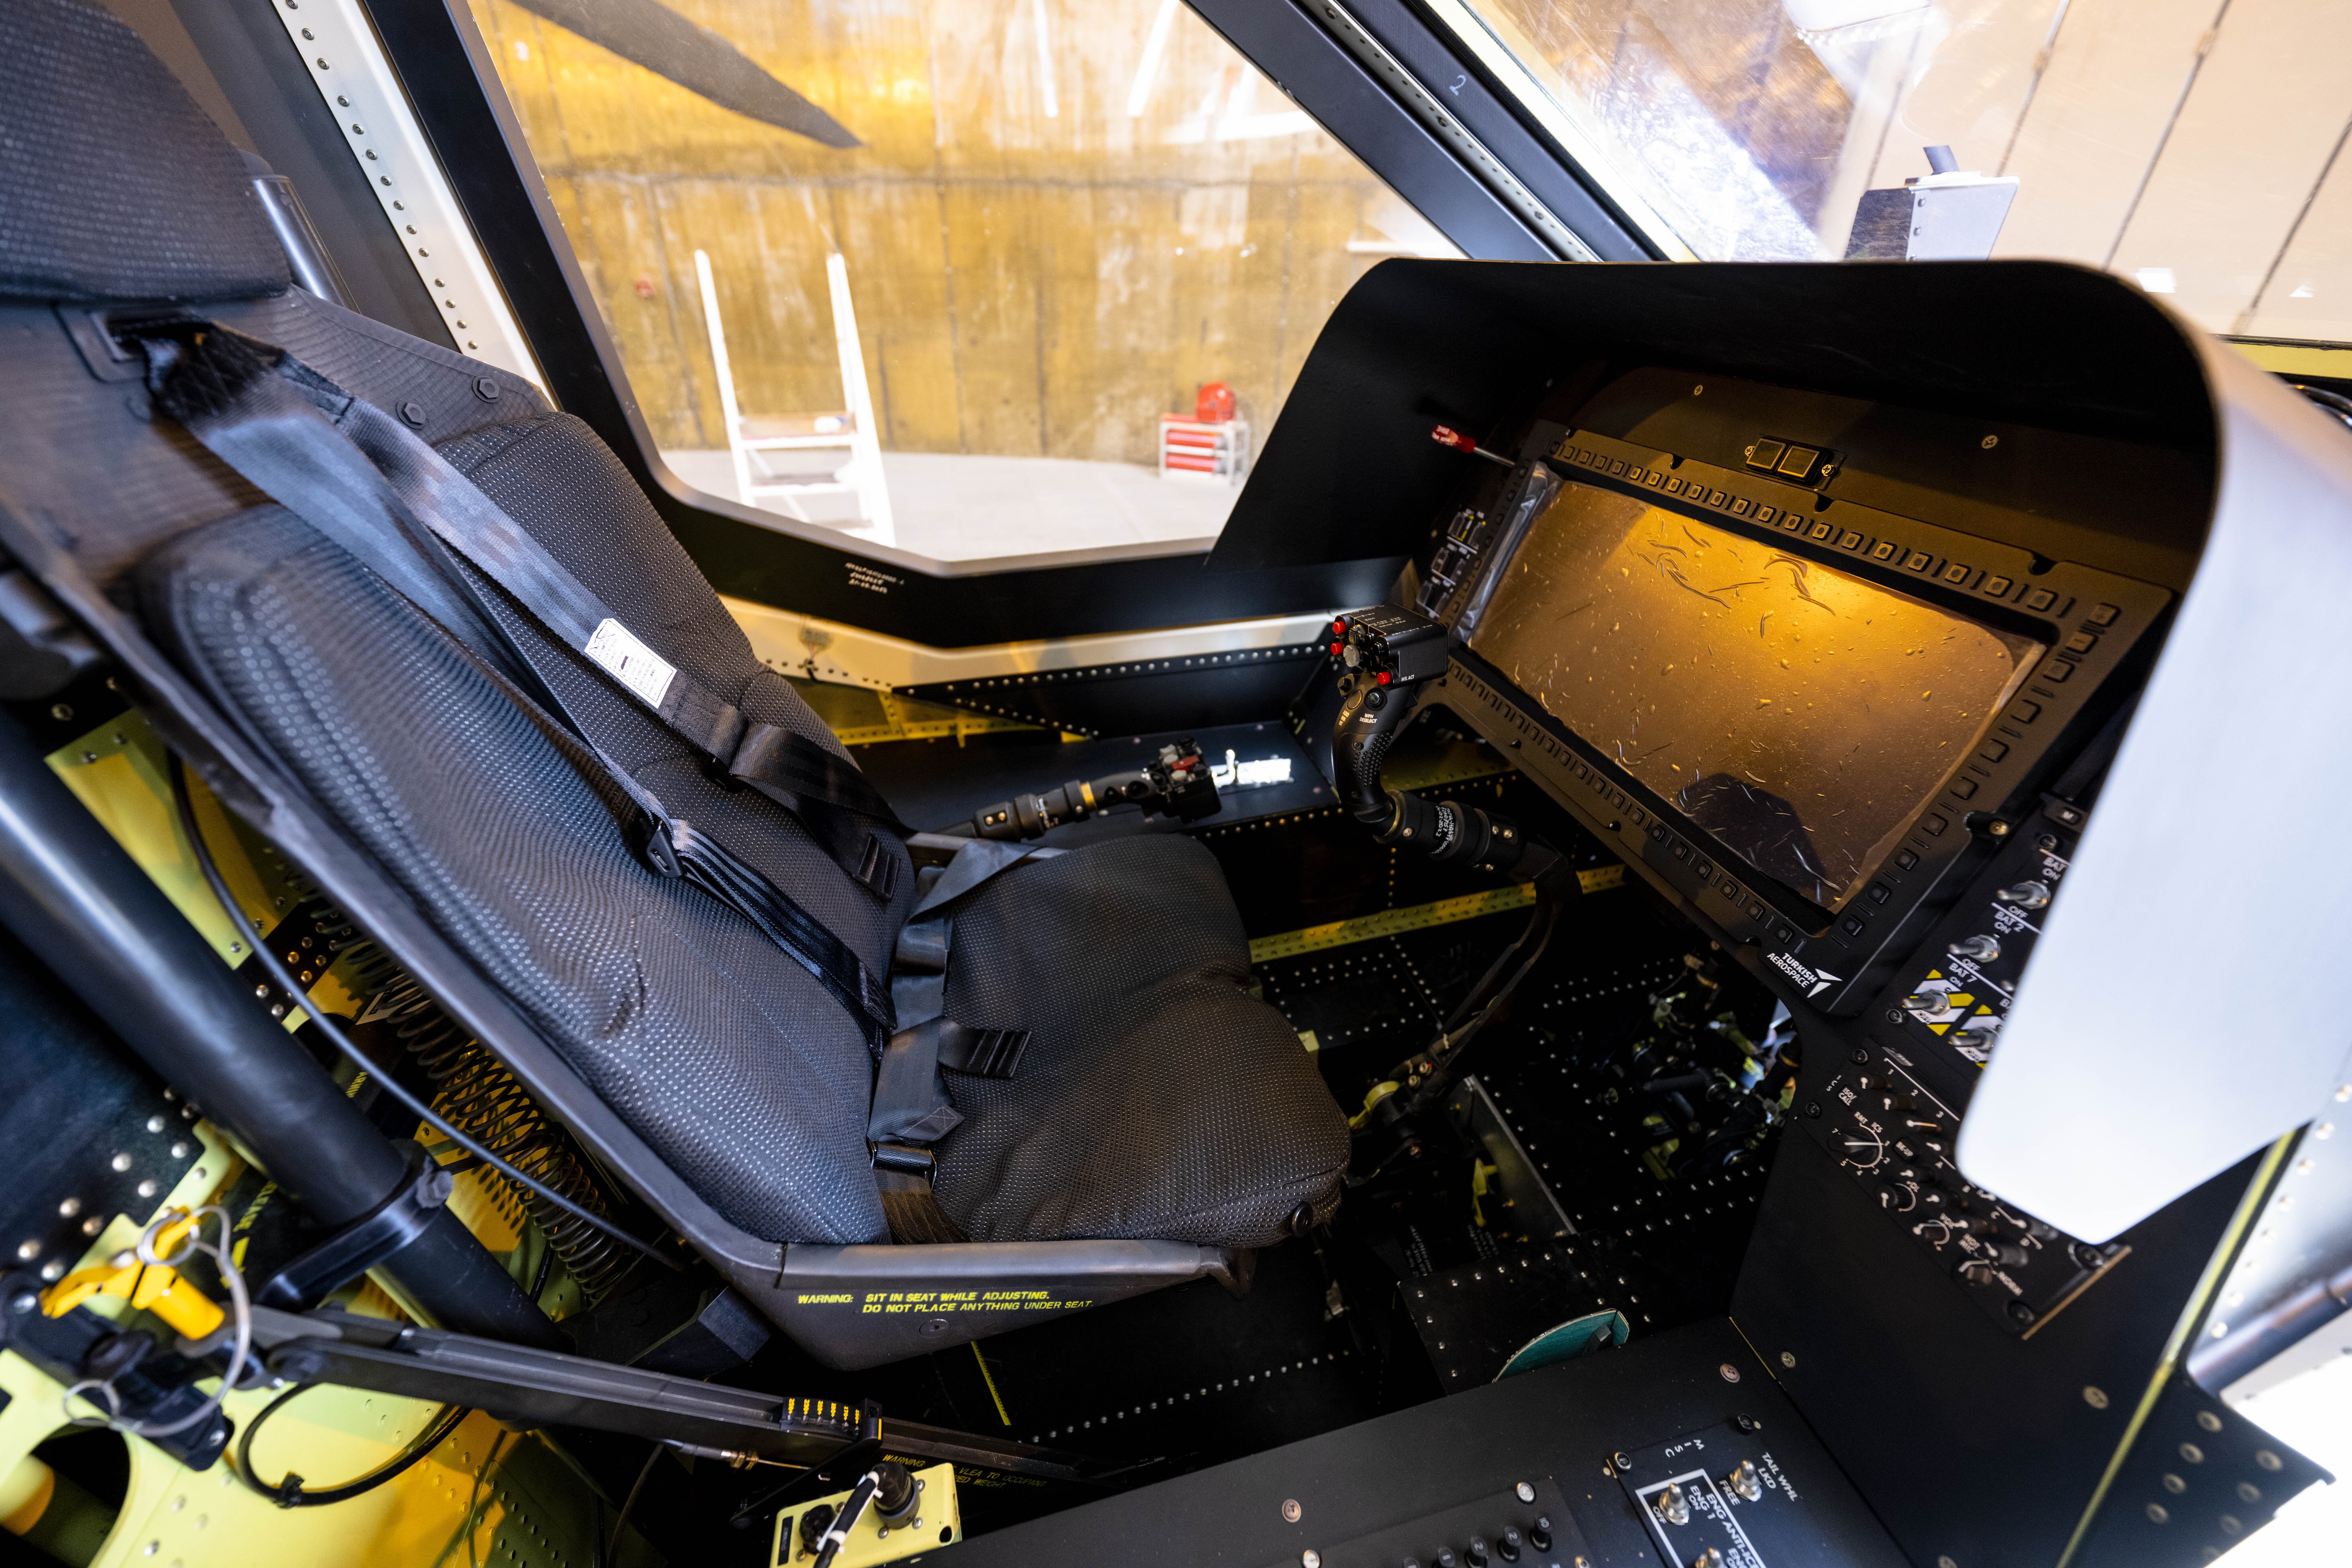 ANKARA, TURKIYE - APRIL 24: An interior view of the ATAK-2 heavy attack helicopter, developed within the scope of Heavy Class Attack Helicopter Project under progress by Turkish Aerospace Industries (TAI) and Turkish Defence Industry Agency, in Ankara, Turkiye on April 24, 2023. (Photo by Aytac Unal/Anadolu Agency via Getty Images)